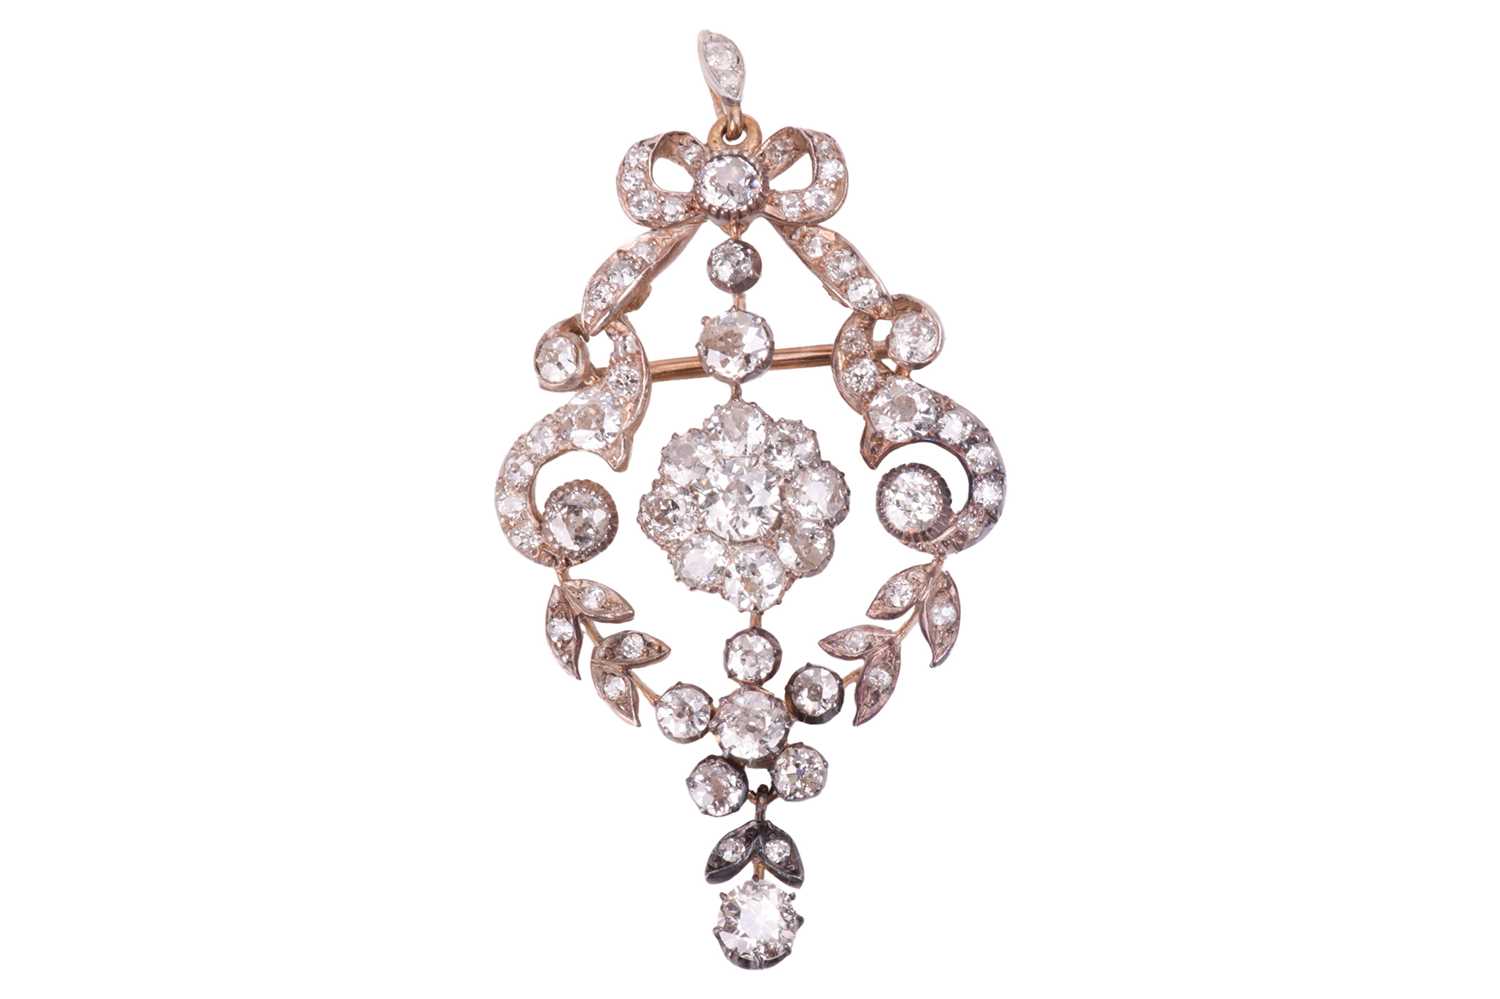 A late 19th / early 20th-century diamond brooch / pendant in a floral and foliate design with a